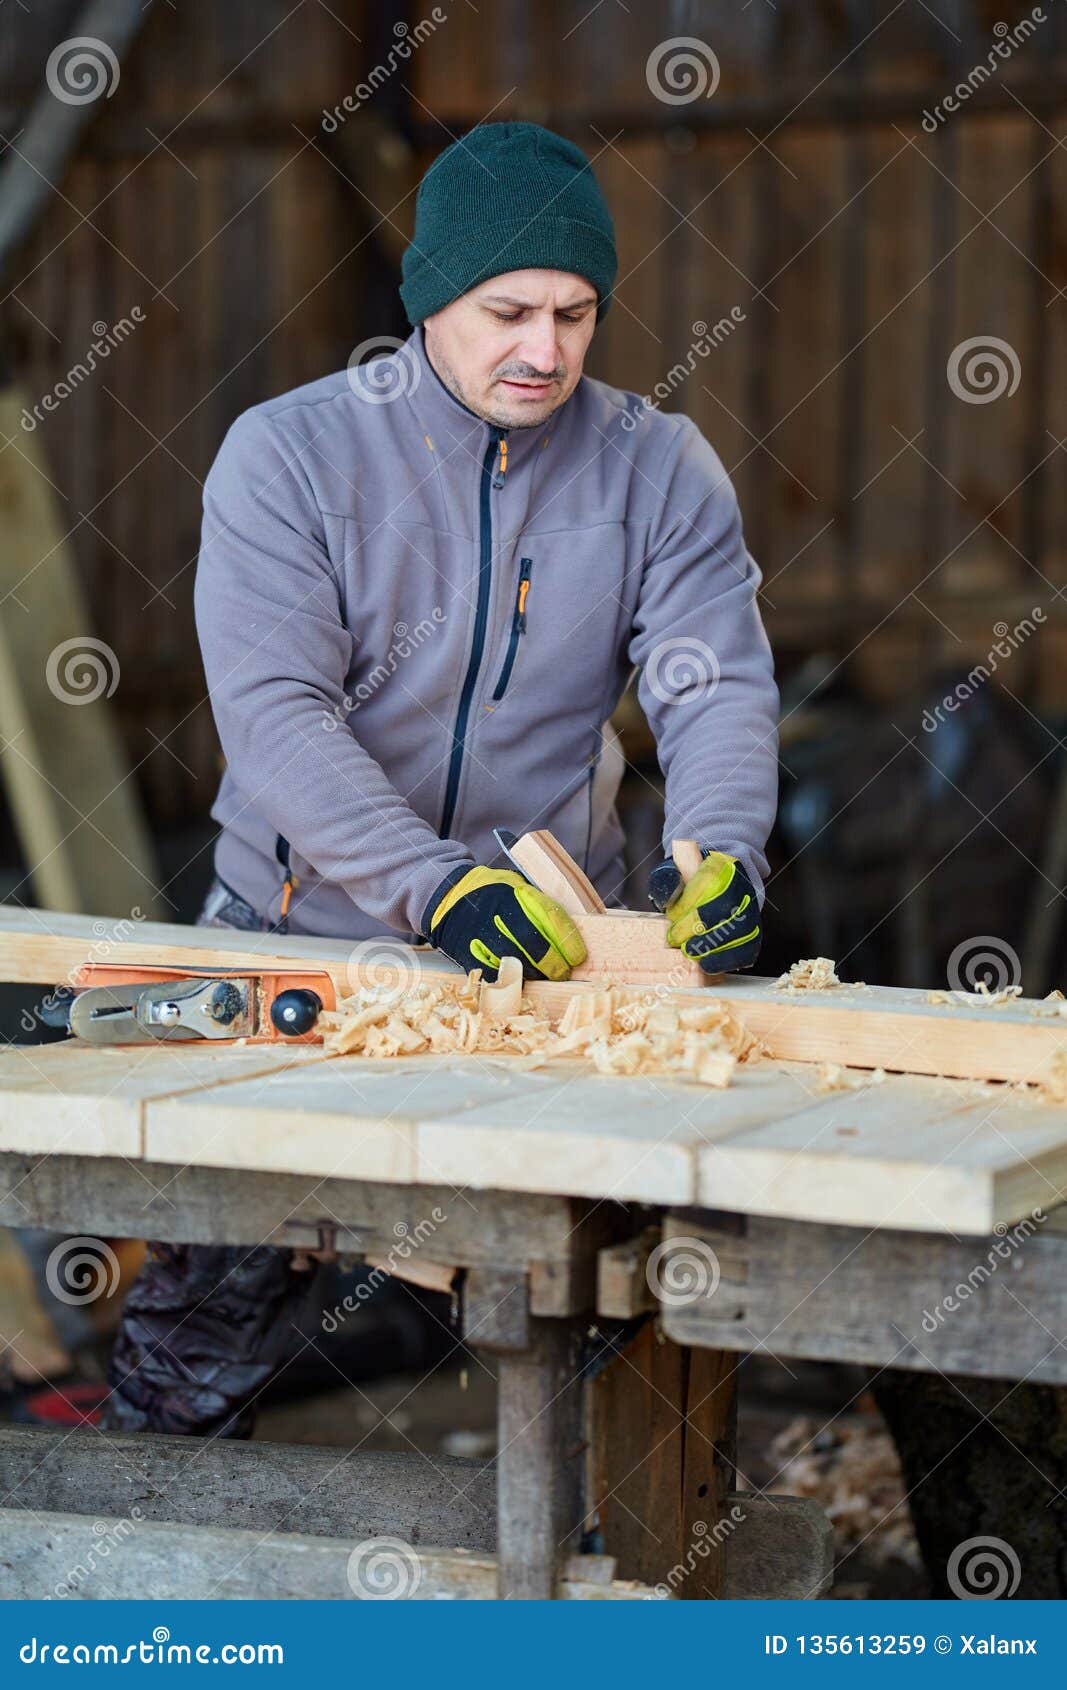 Wood Crafting Making Furniture With Hand Tools Stock Image